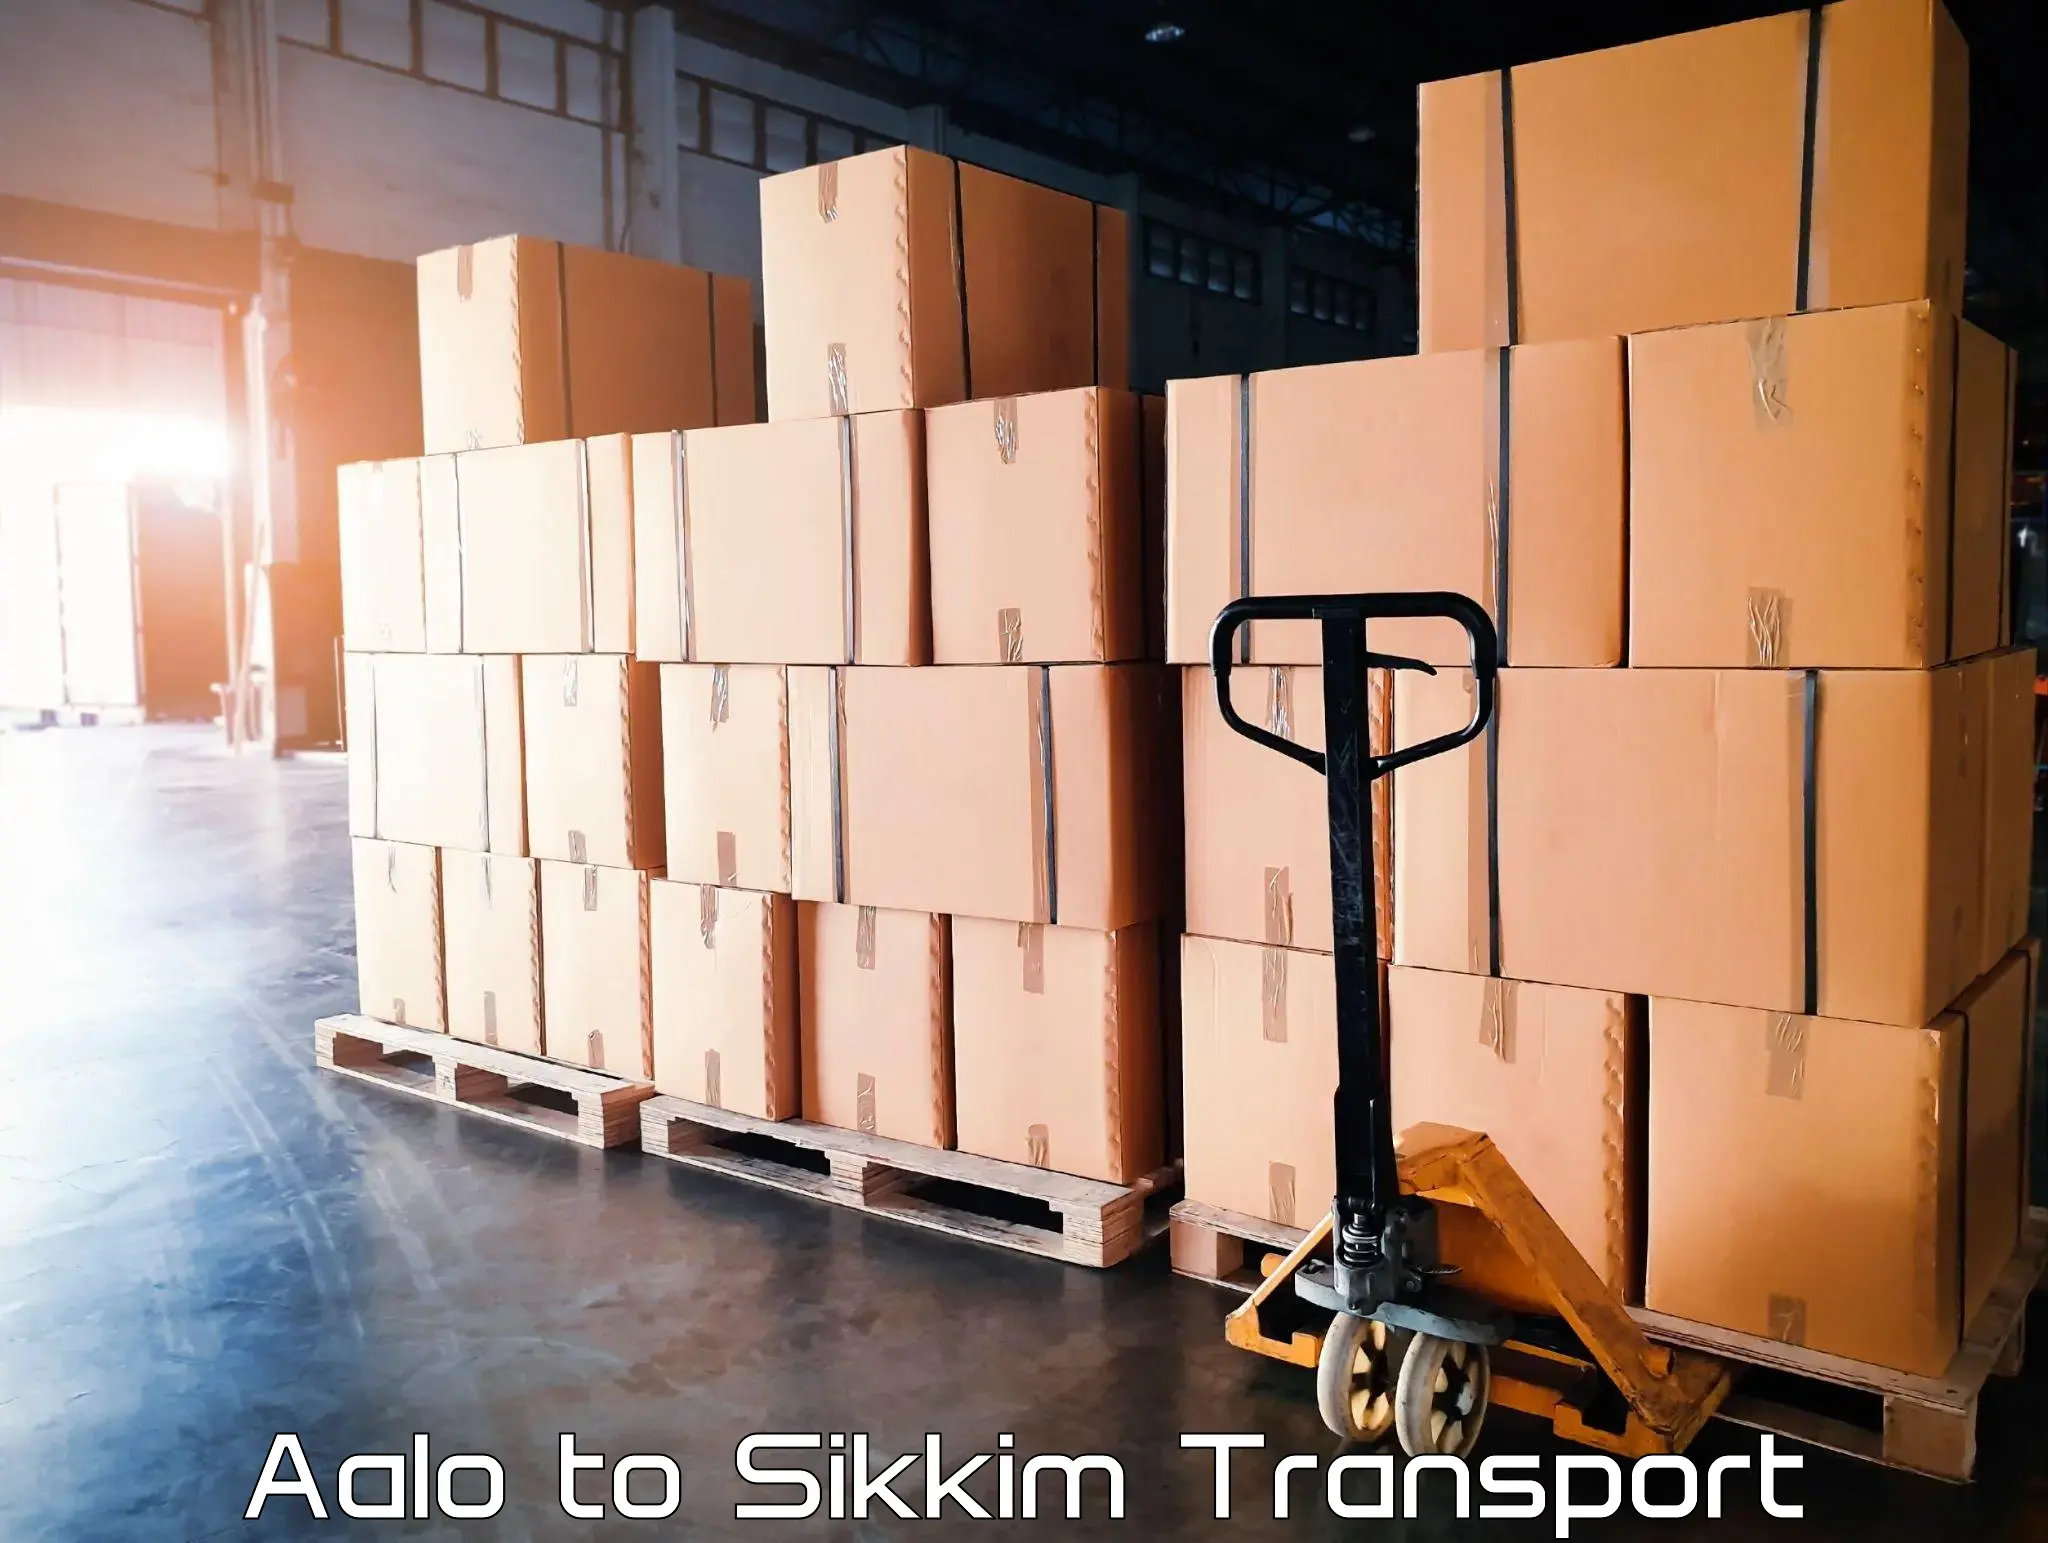 Daily transport service Aalo to South Sikkim